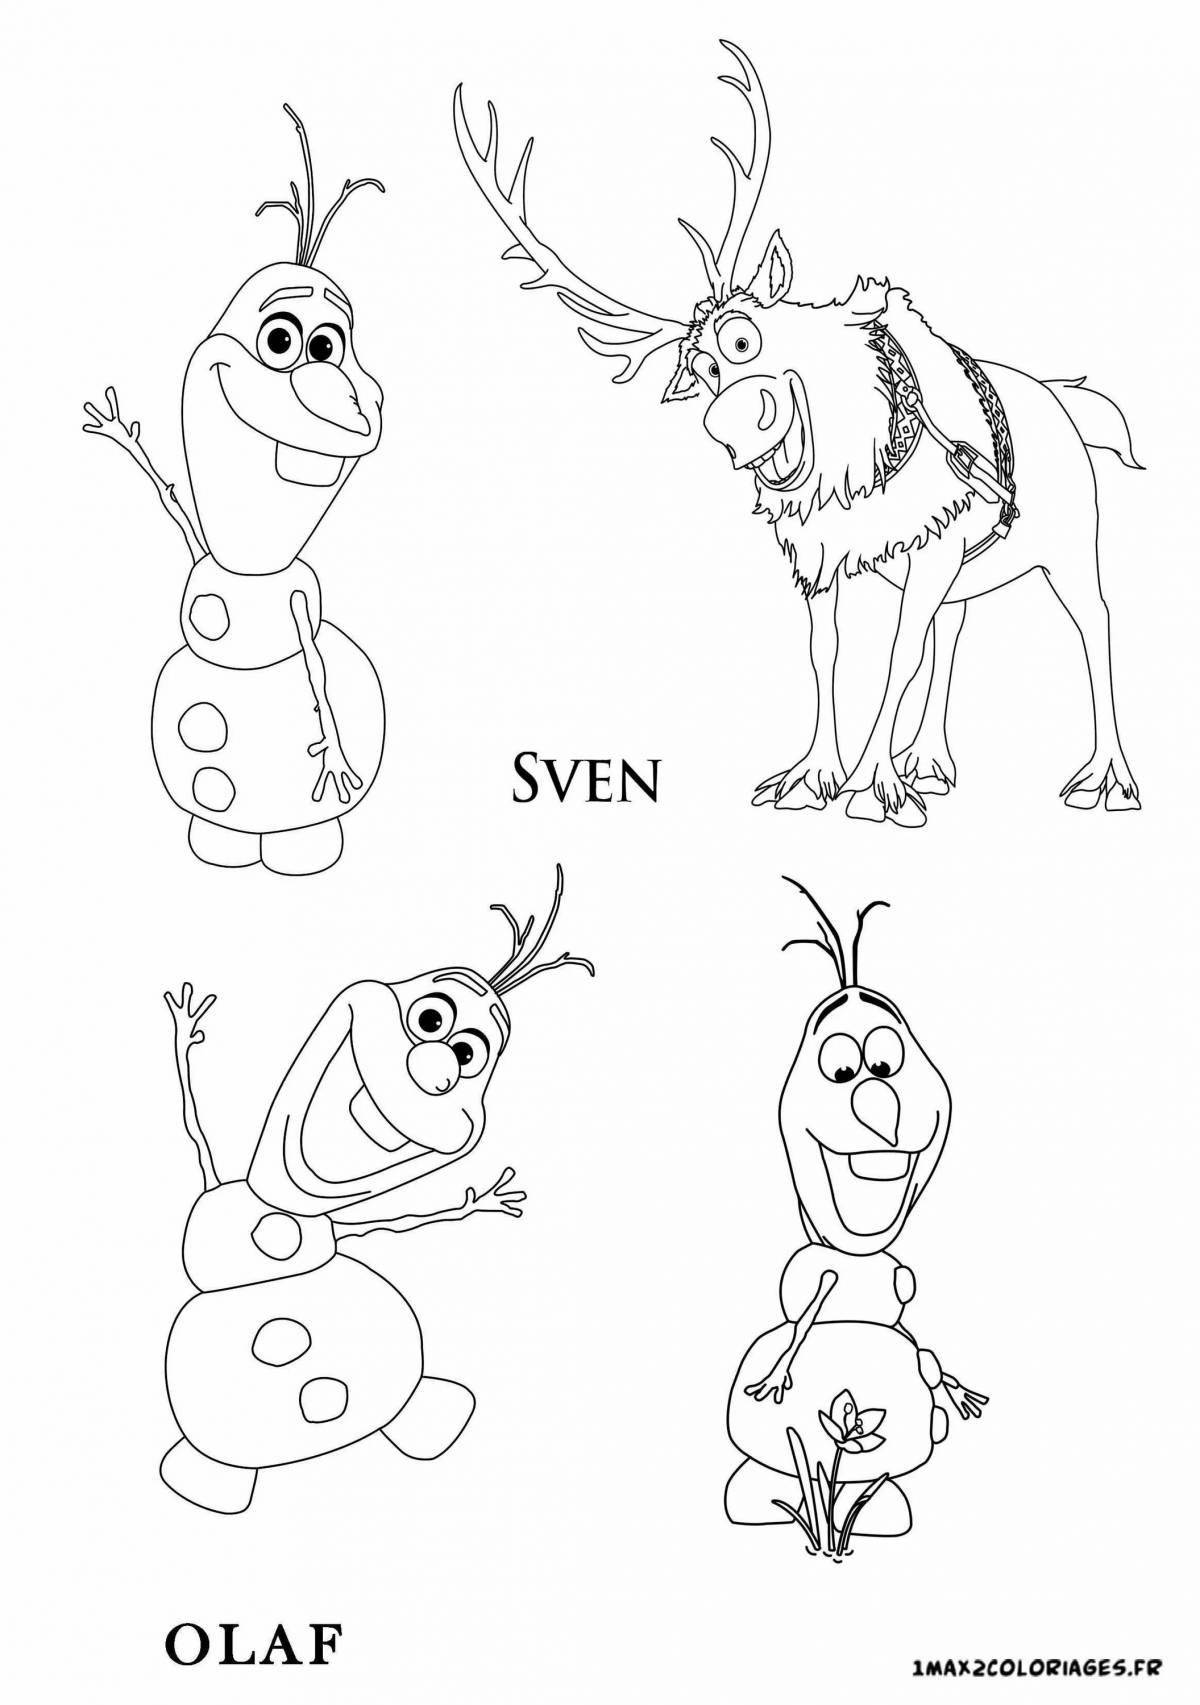 Olaf's cold heart shiny coloring book